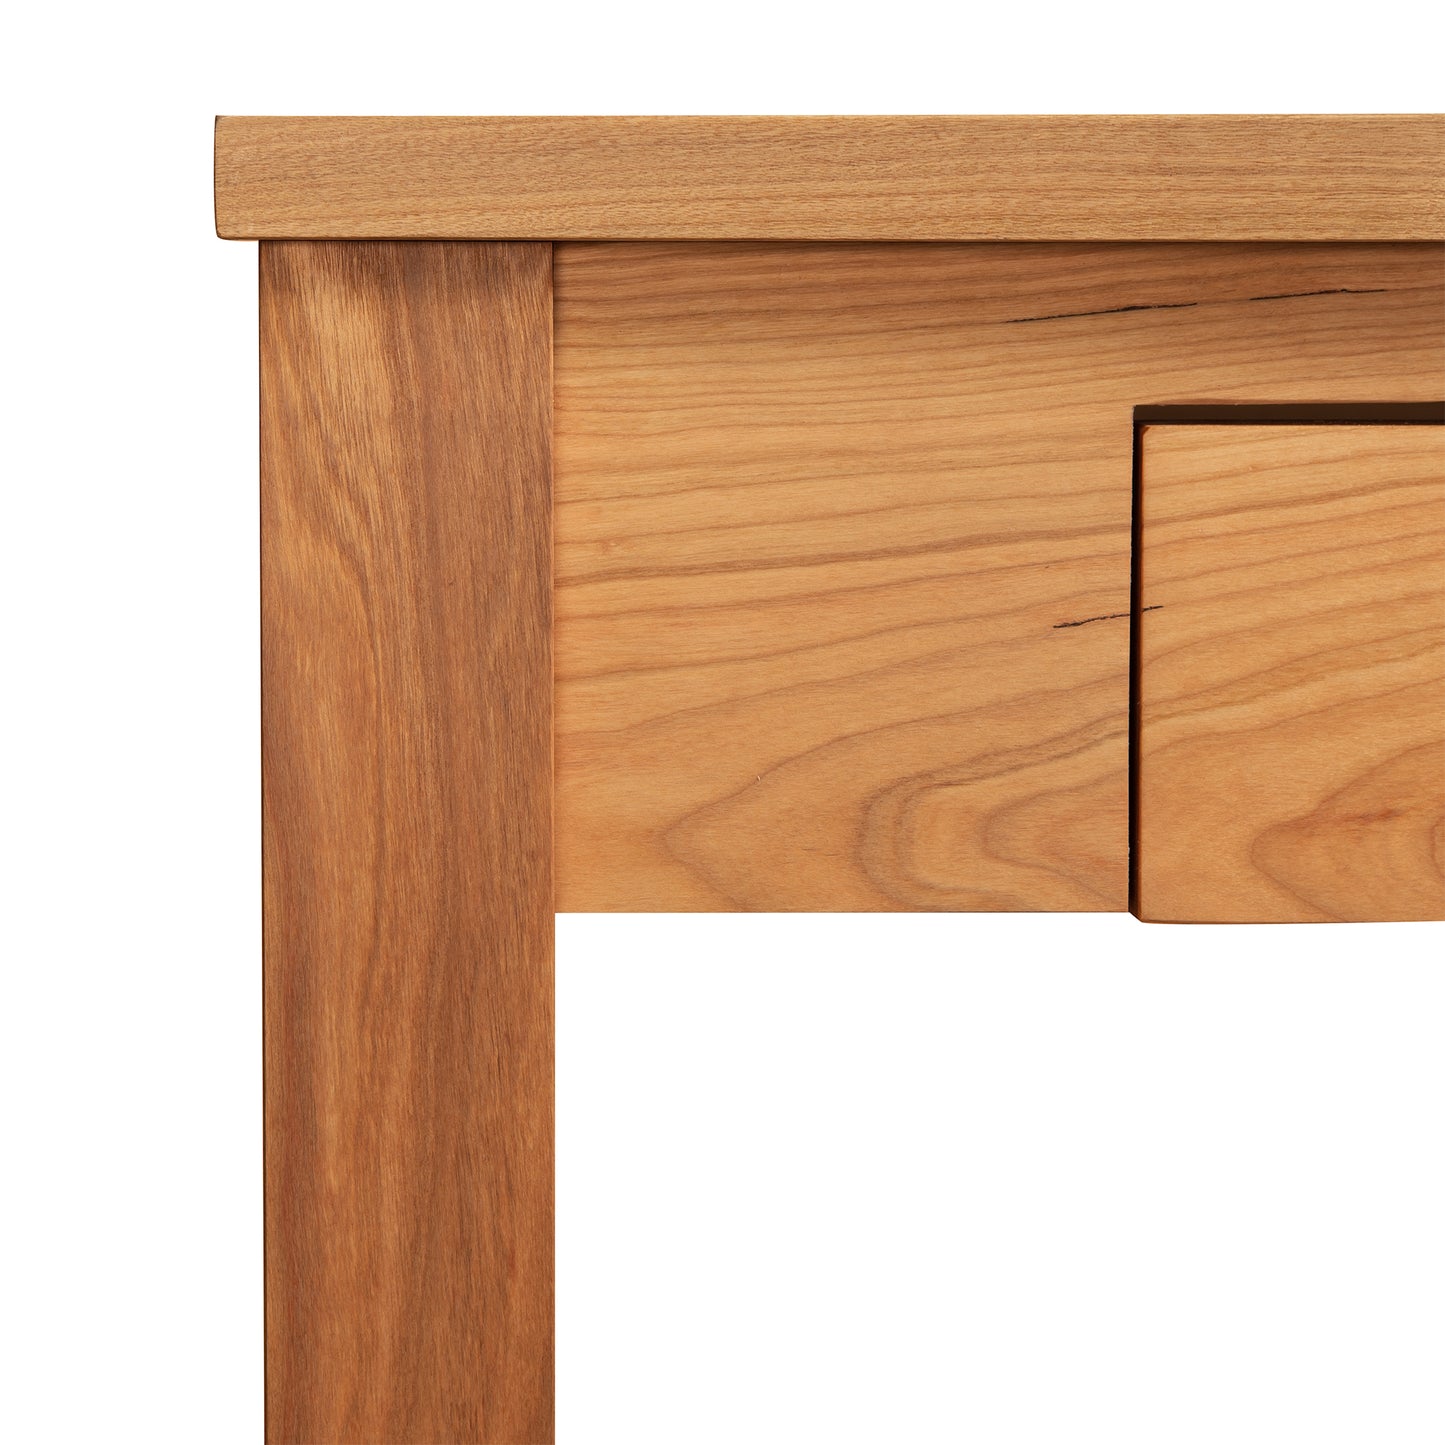 A close up of a Ryegate Writing Desk by Maple Corner Woodworks, a contemporary wooden desk with a drawer.